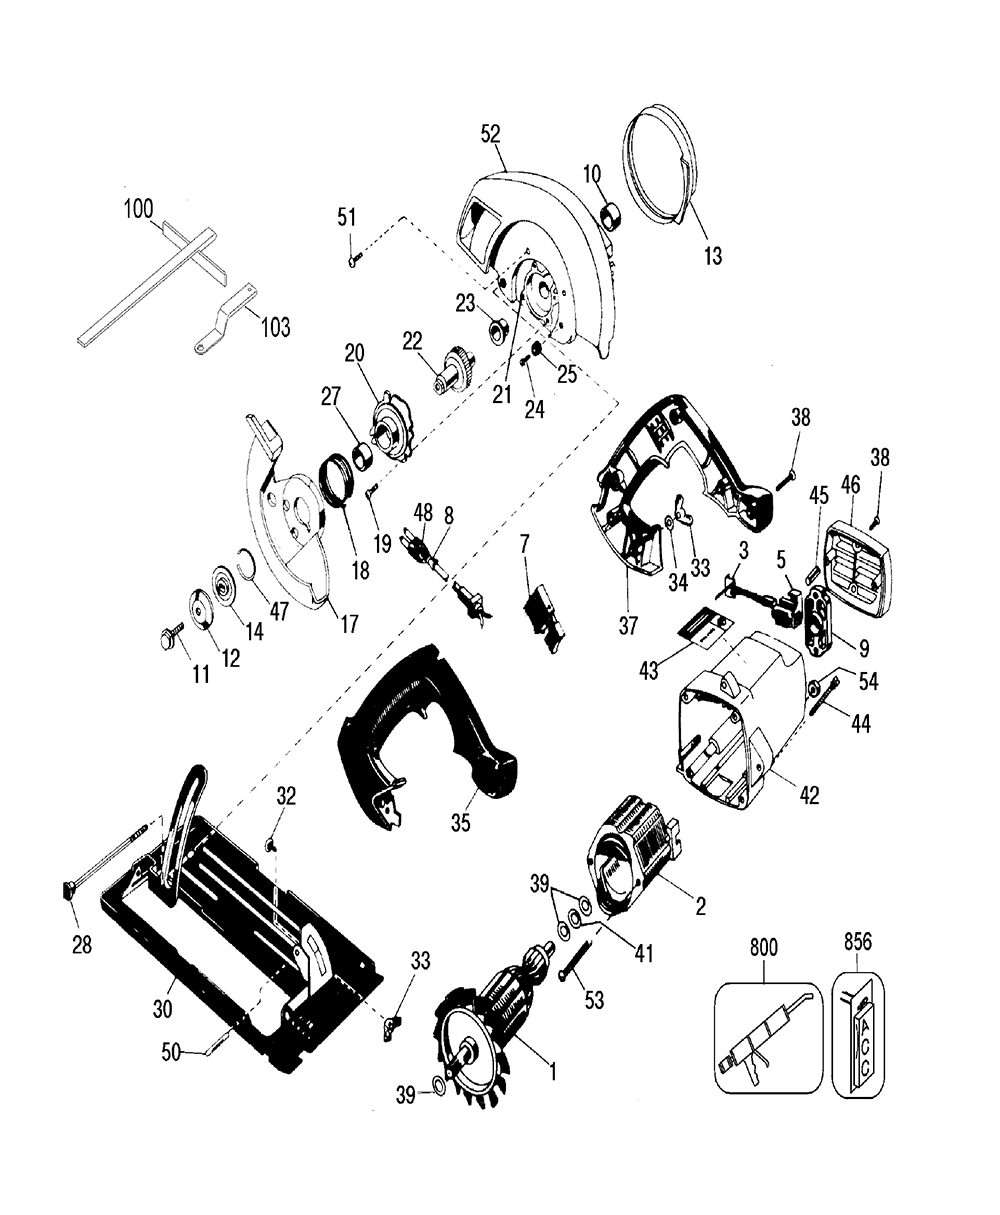 Black and Decker 7391 Parts List and Diagram - Type 4